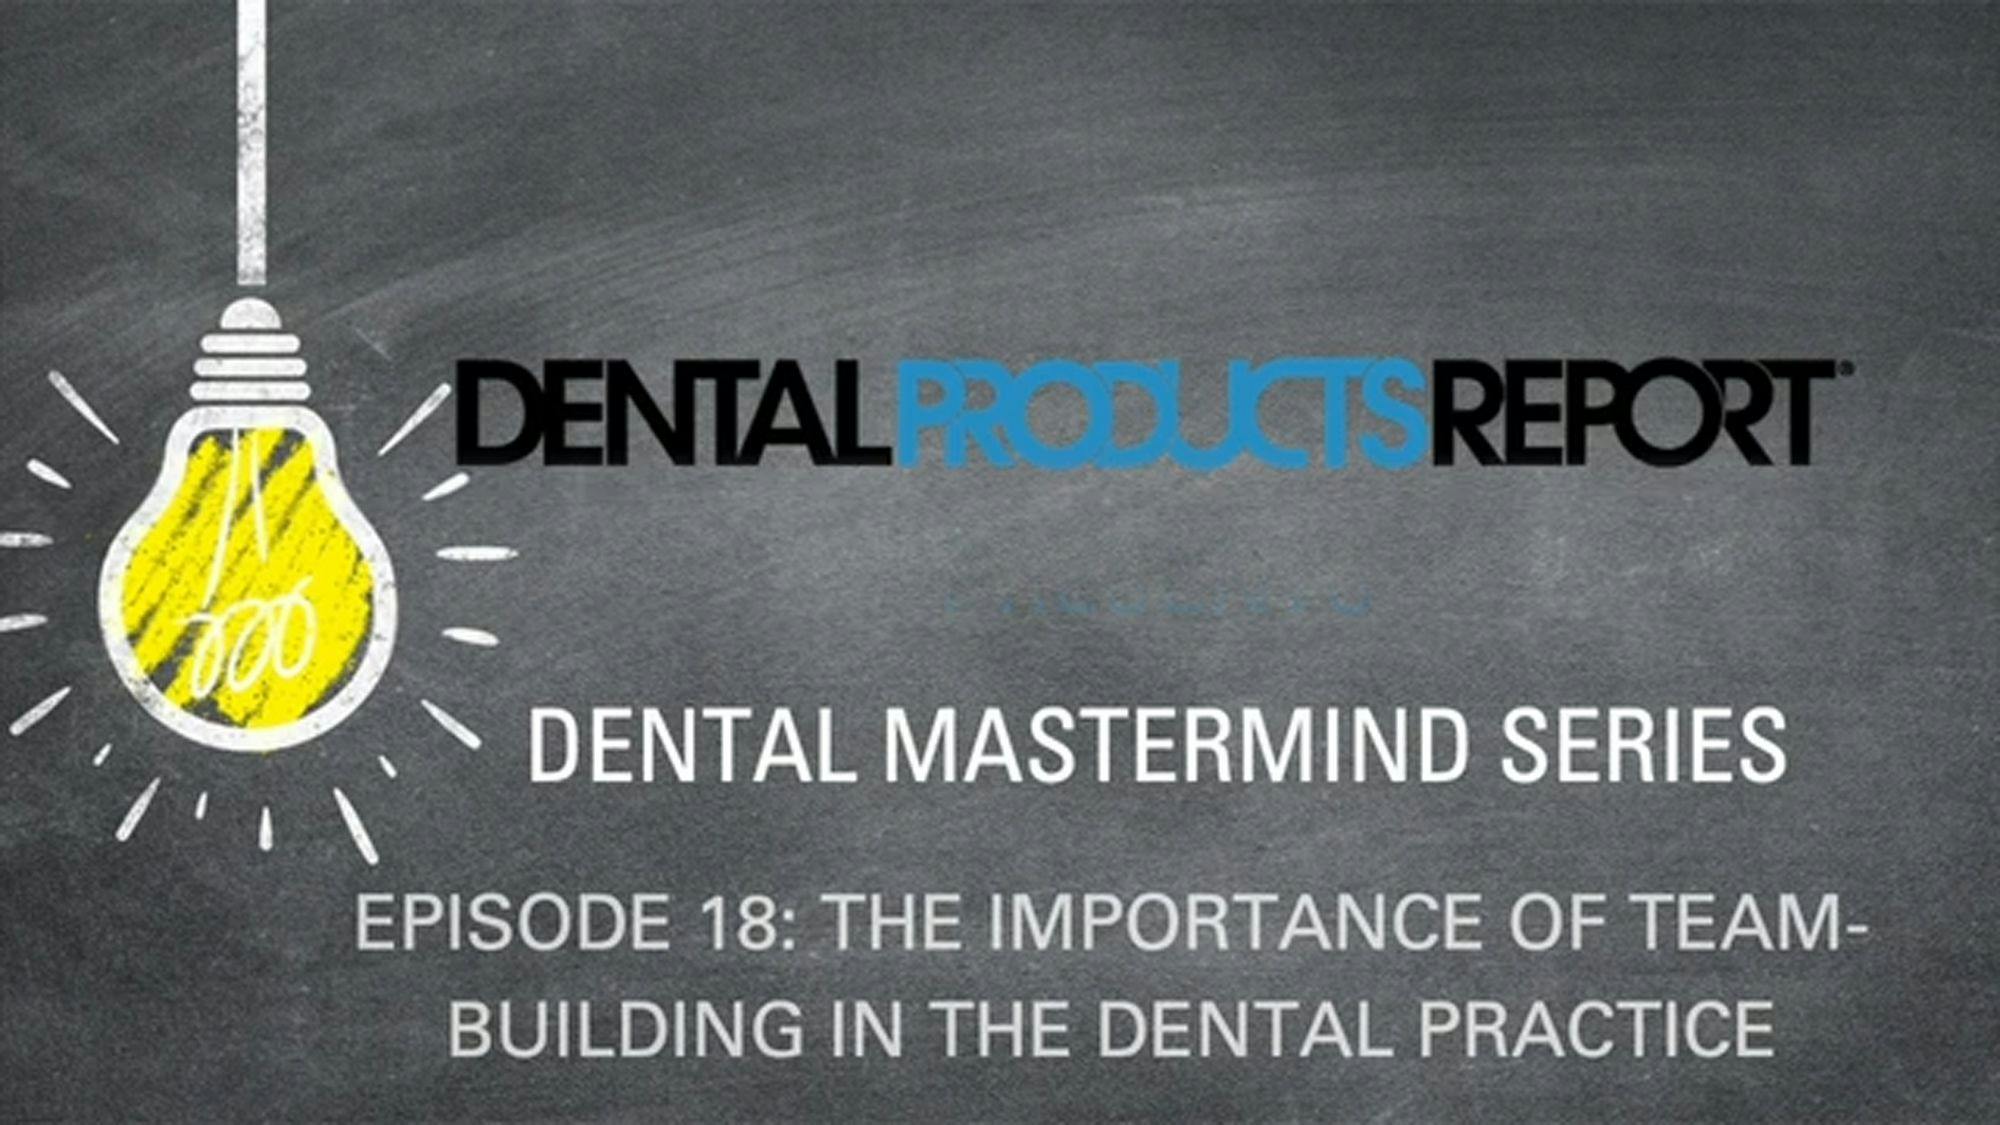 Mastermind Episode 18 - The Importance of Team-Building in the Dental Practice